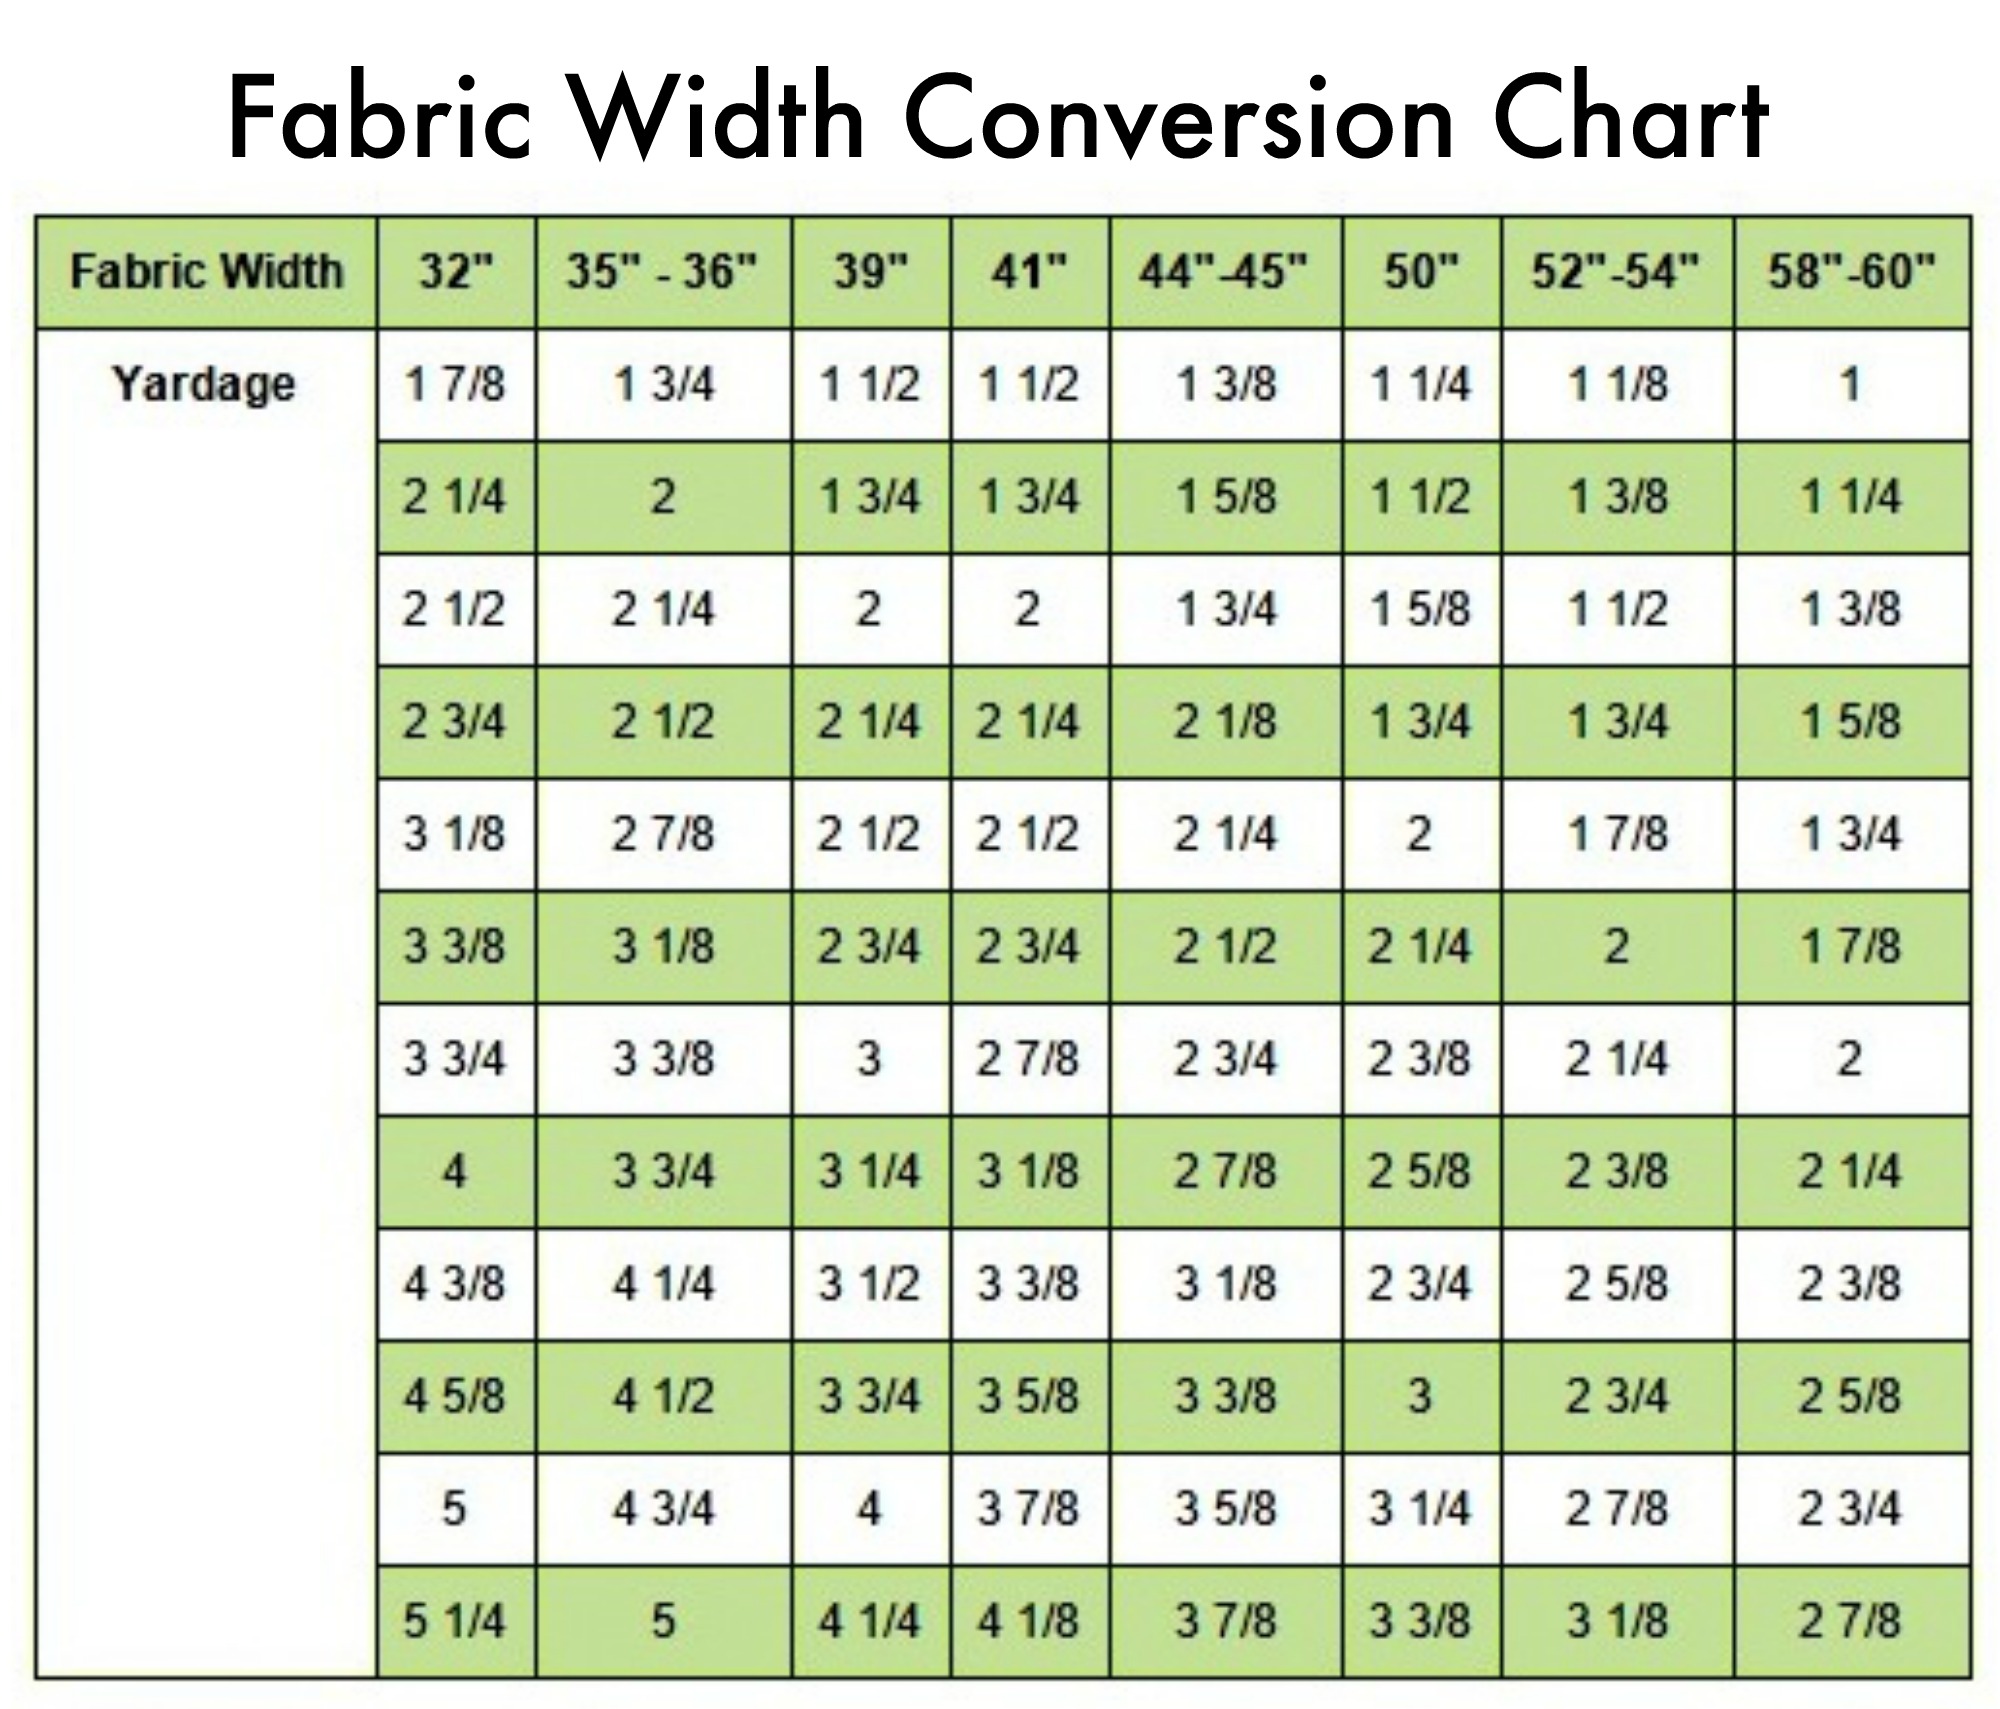 Conversion Chart For Fabric Widths